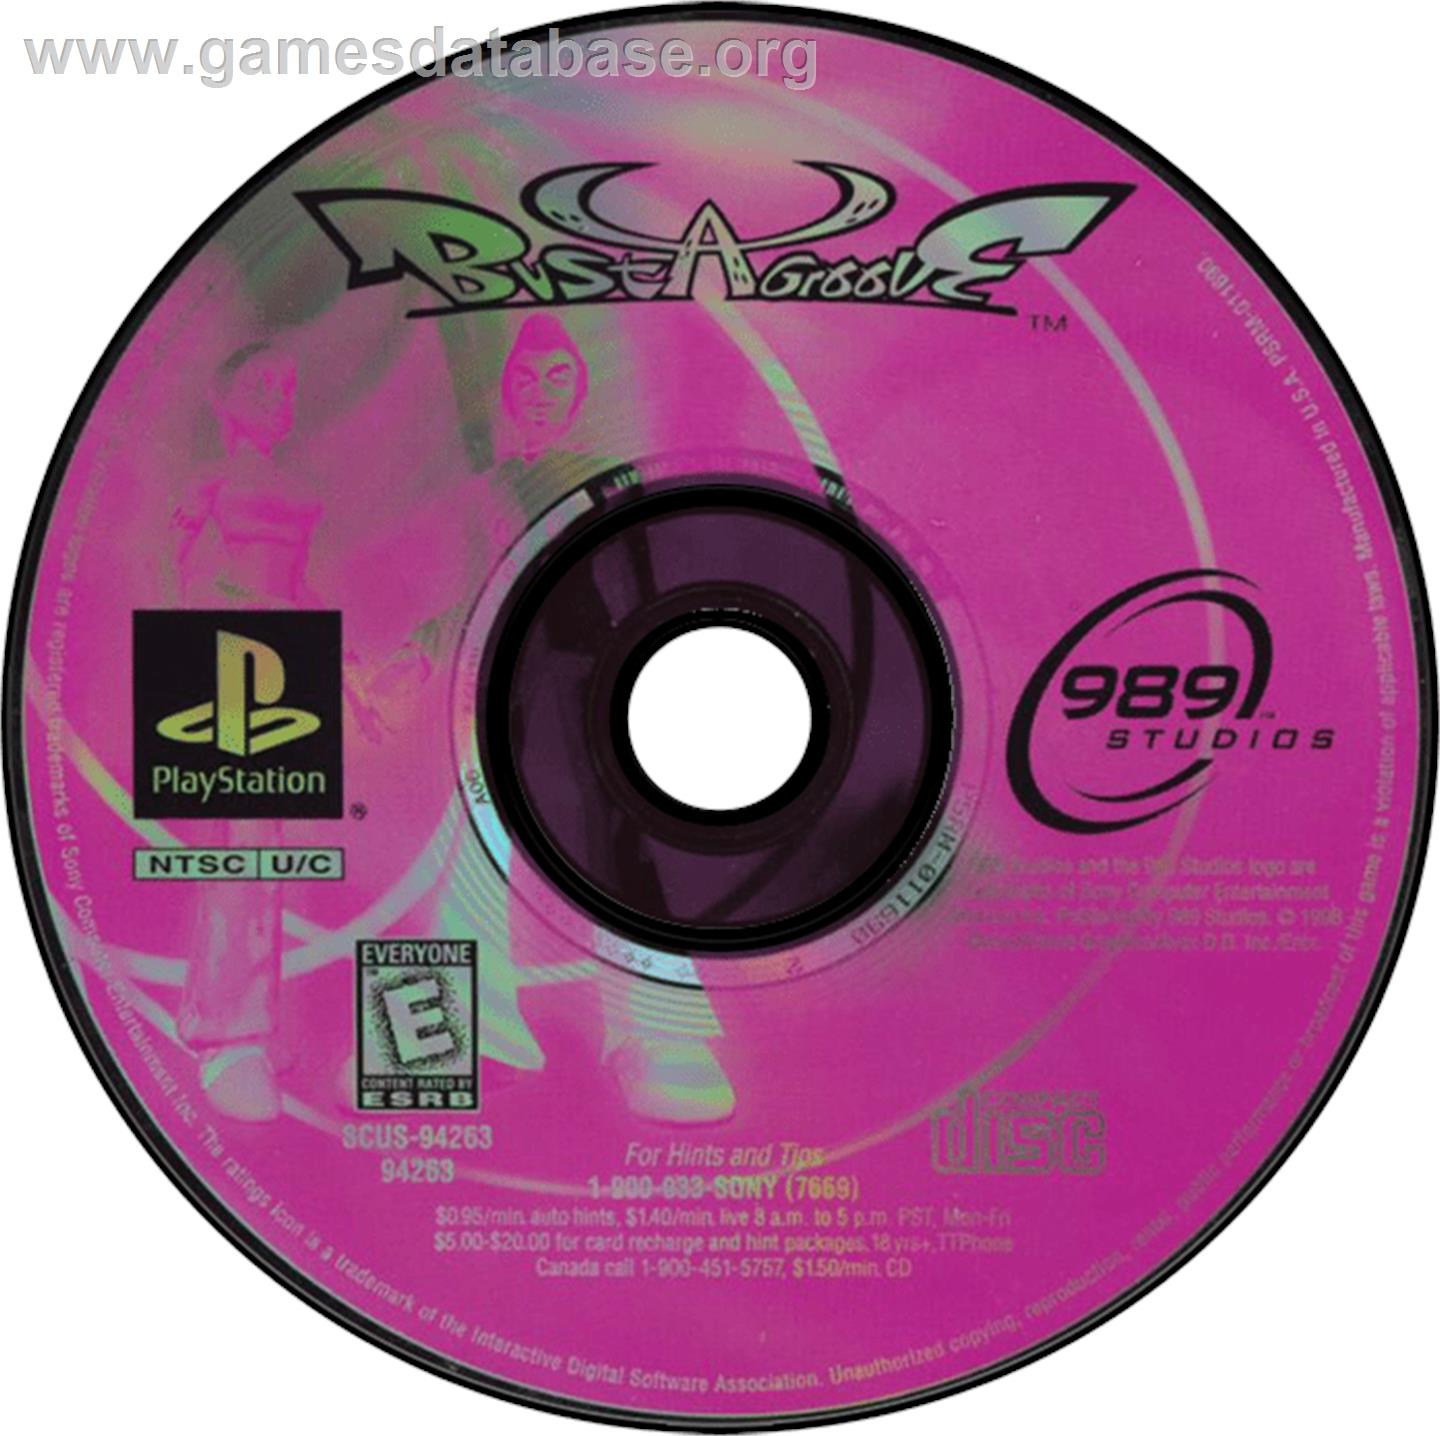 Bust A Groove - Sony Playstation - Artwork - Disc